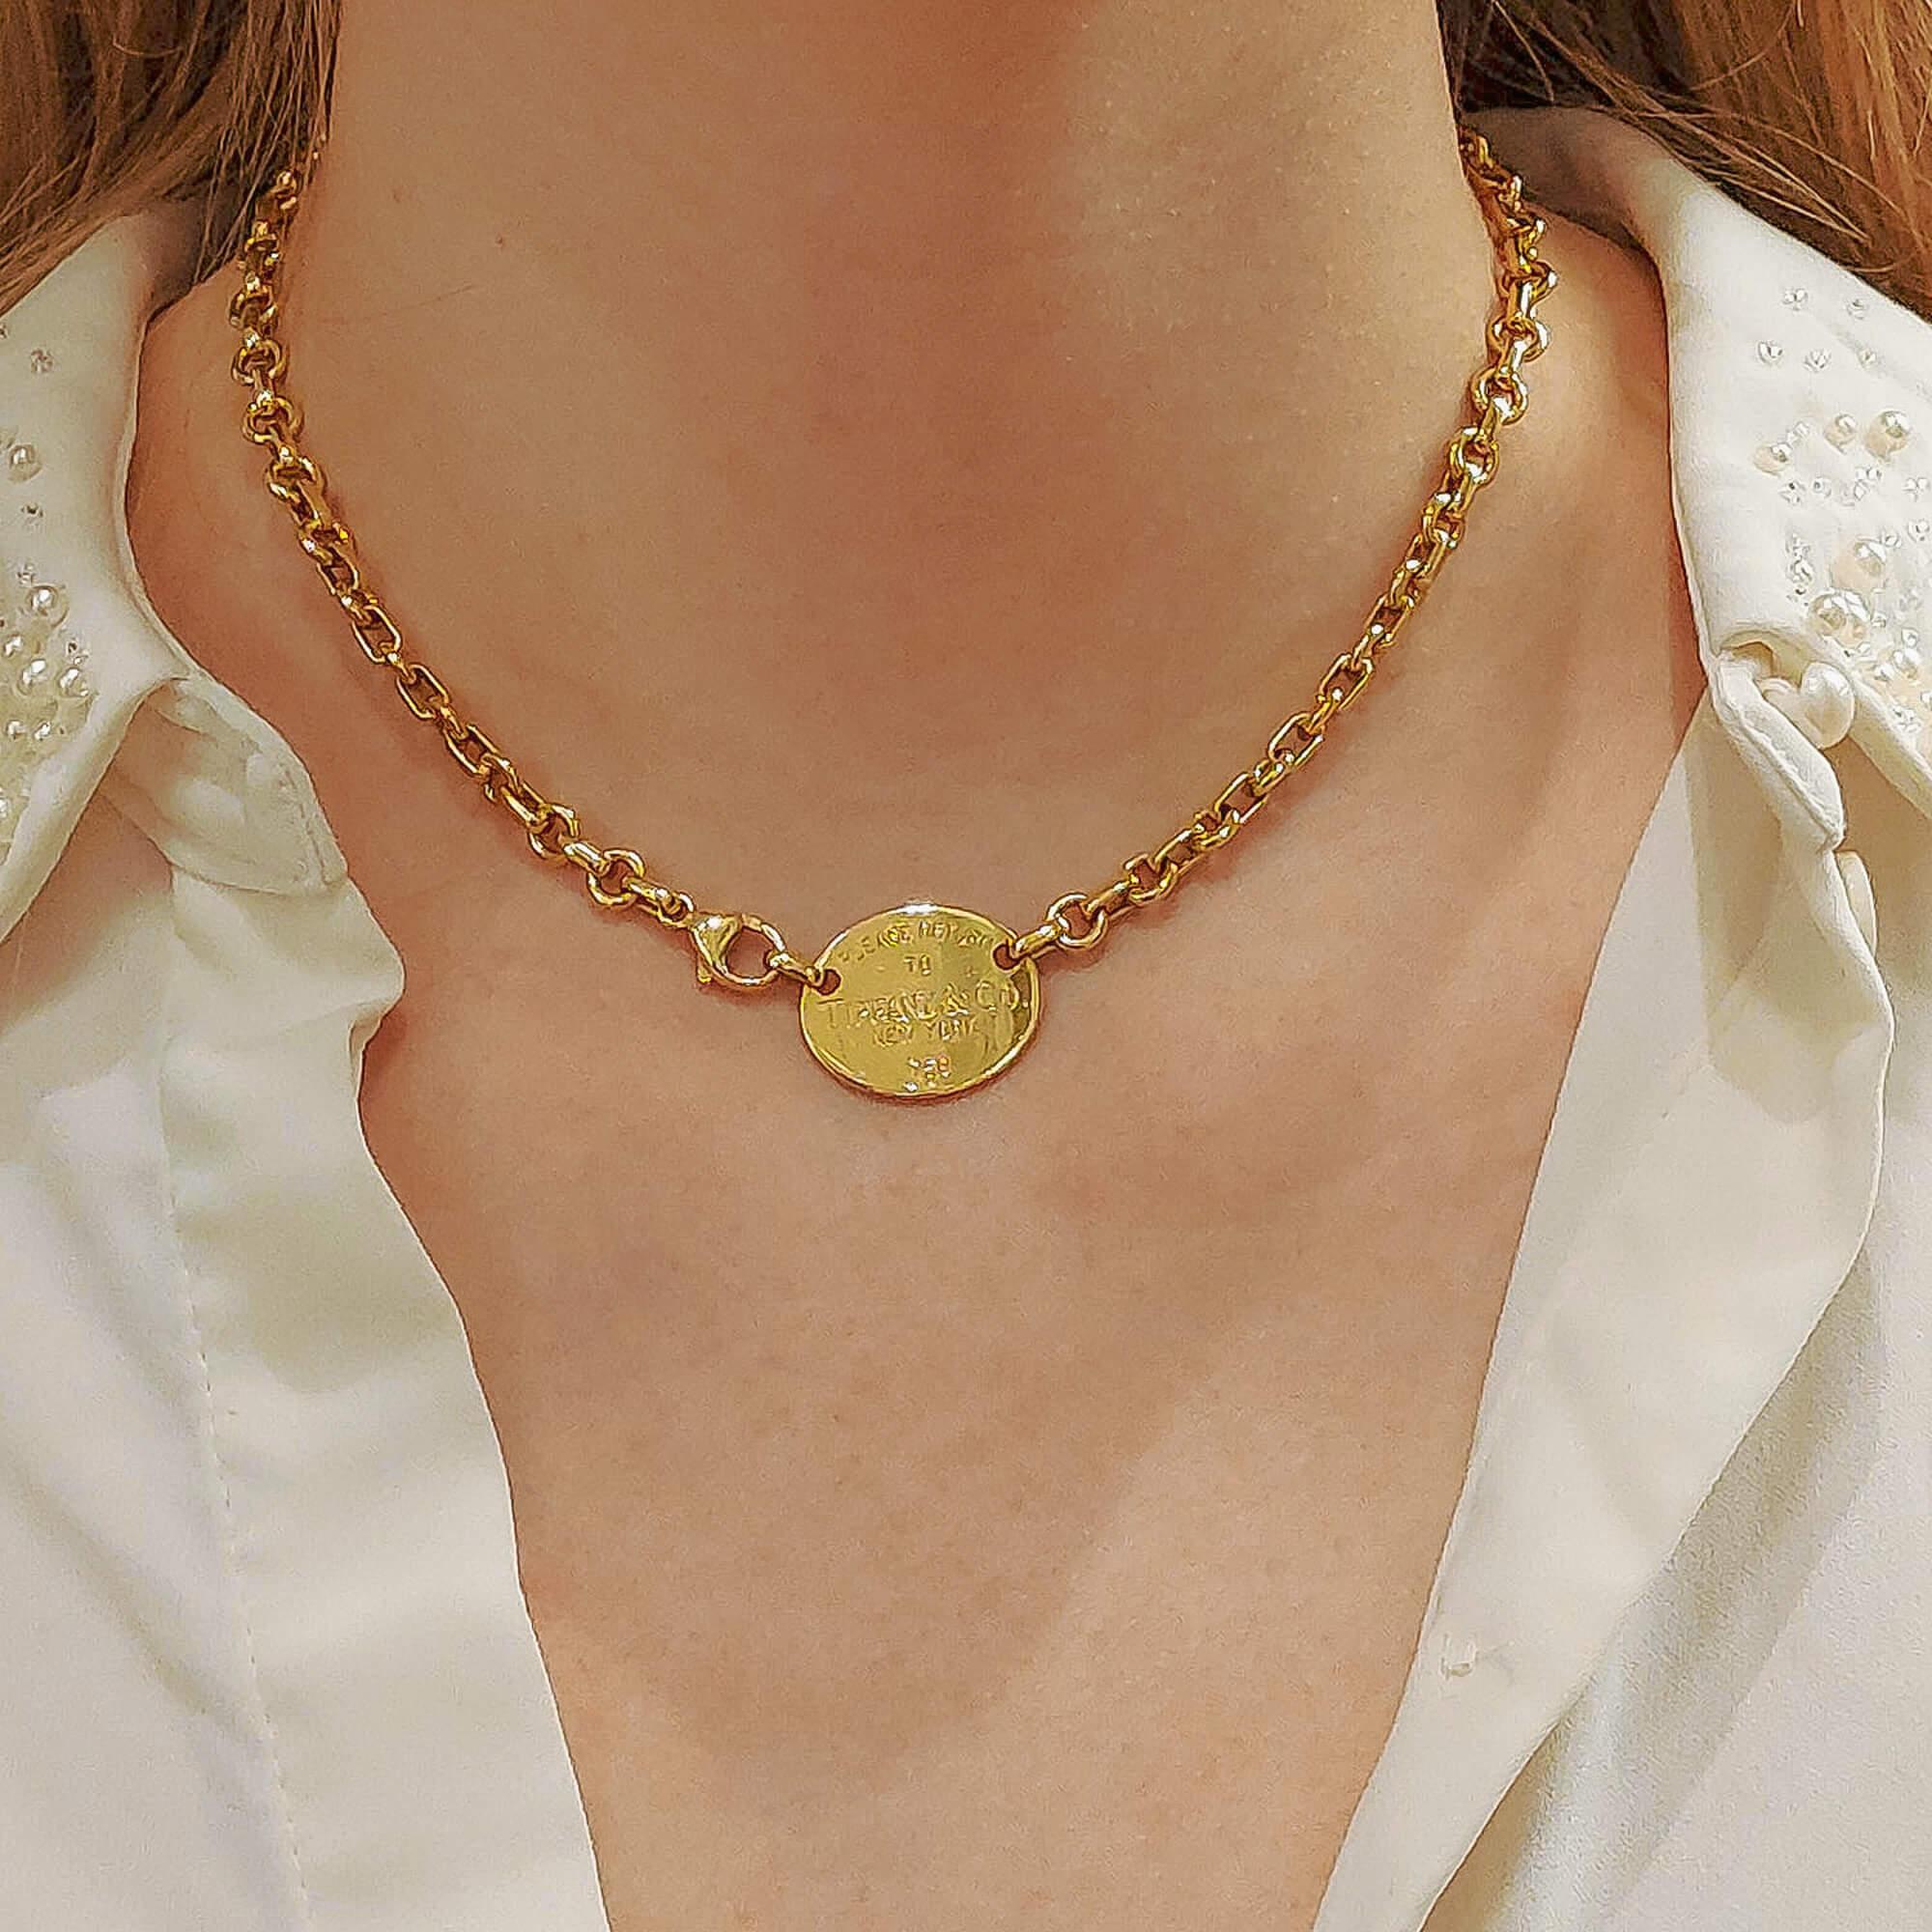 An iconic 'Please Return to Tiffany' Tiffany & Co. necklace in solid 18k yellow gold. The necklace depicts the iconic 'Return to Tiffany' slogan upon a yellow gold shield which sits nicely on the neck (piece in worn photo has been adjusted for